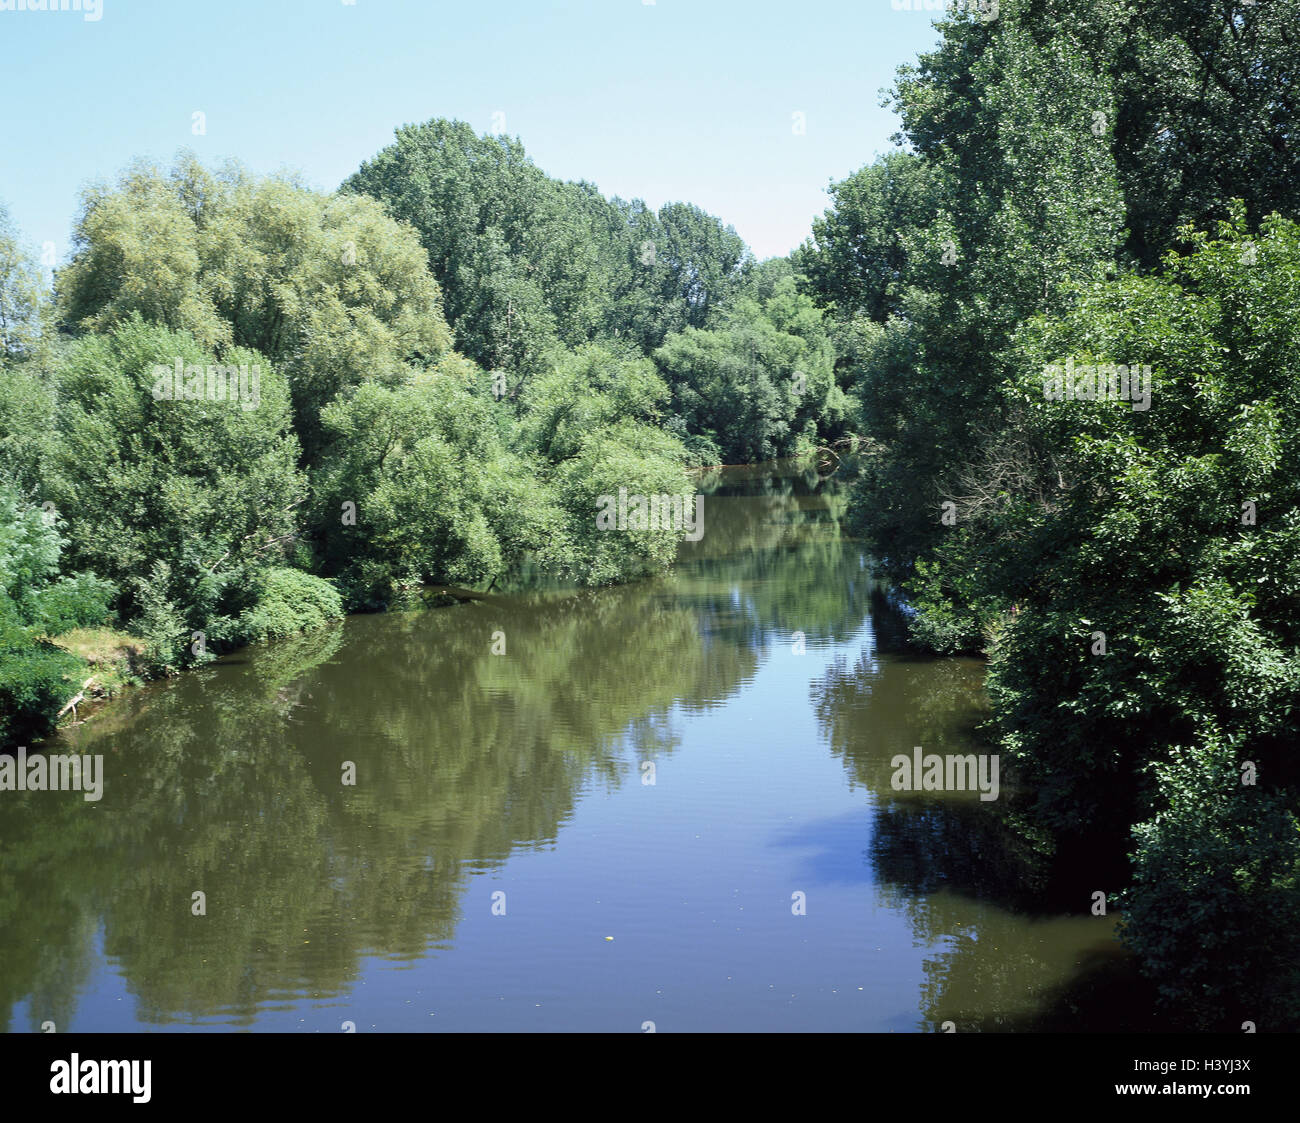 Germany, Saarland, Saarlouis, close Dillingen, Gathering the Saar, Prims, Europe, West Germany, river, rivers, mouth, inlet, water, waters, shore, plants, shrubs, trees, nature, vegetation Stock Photo